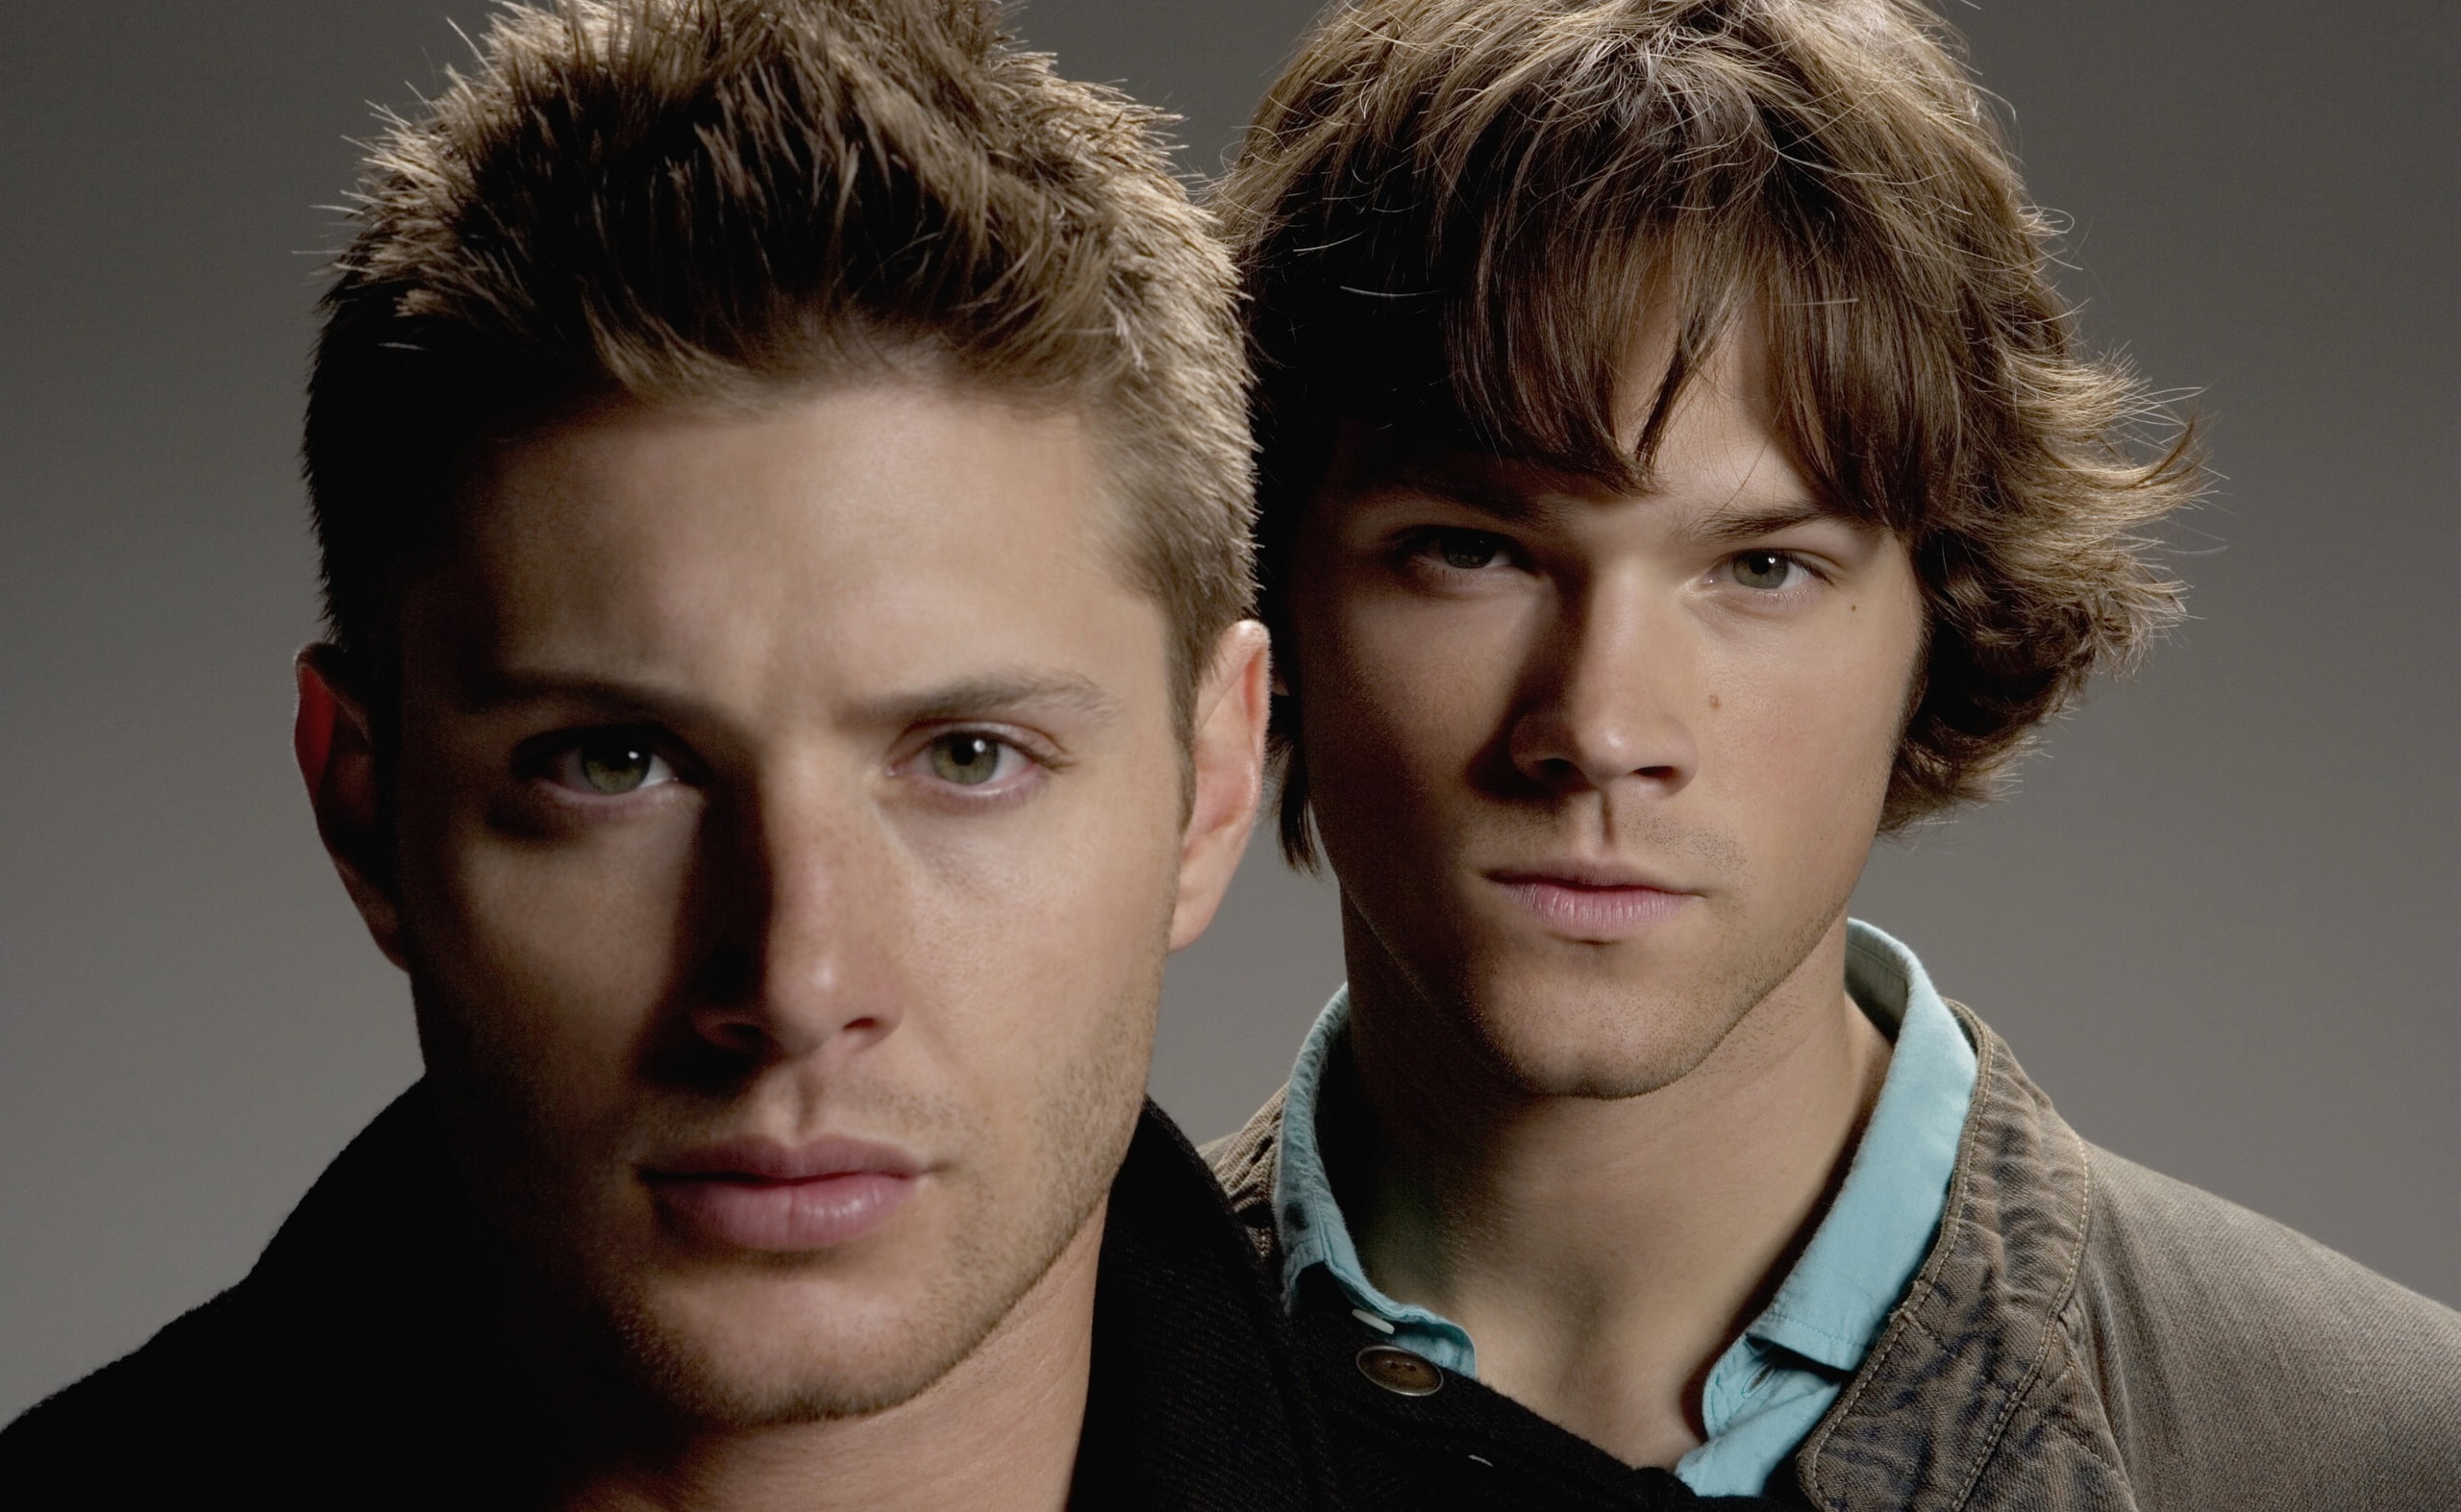 Supernatural (TV Series), Supernatural Sam and Dean, Movies, Other Movies